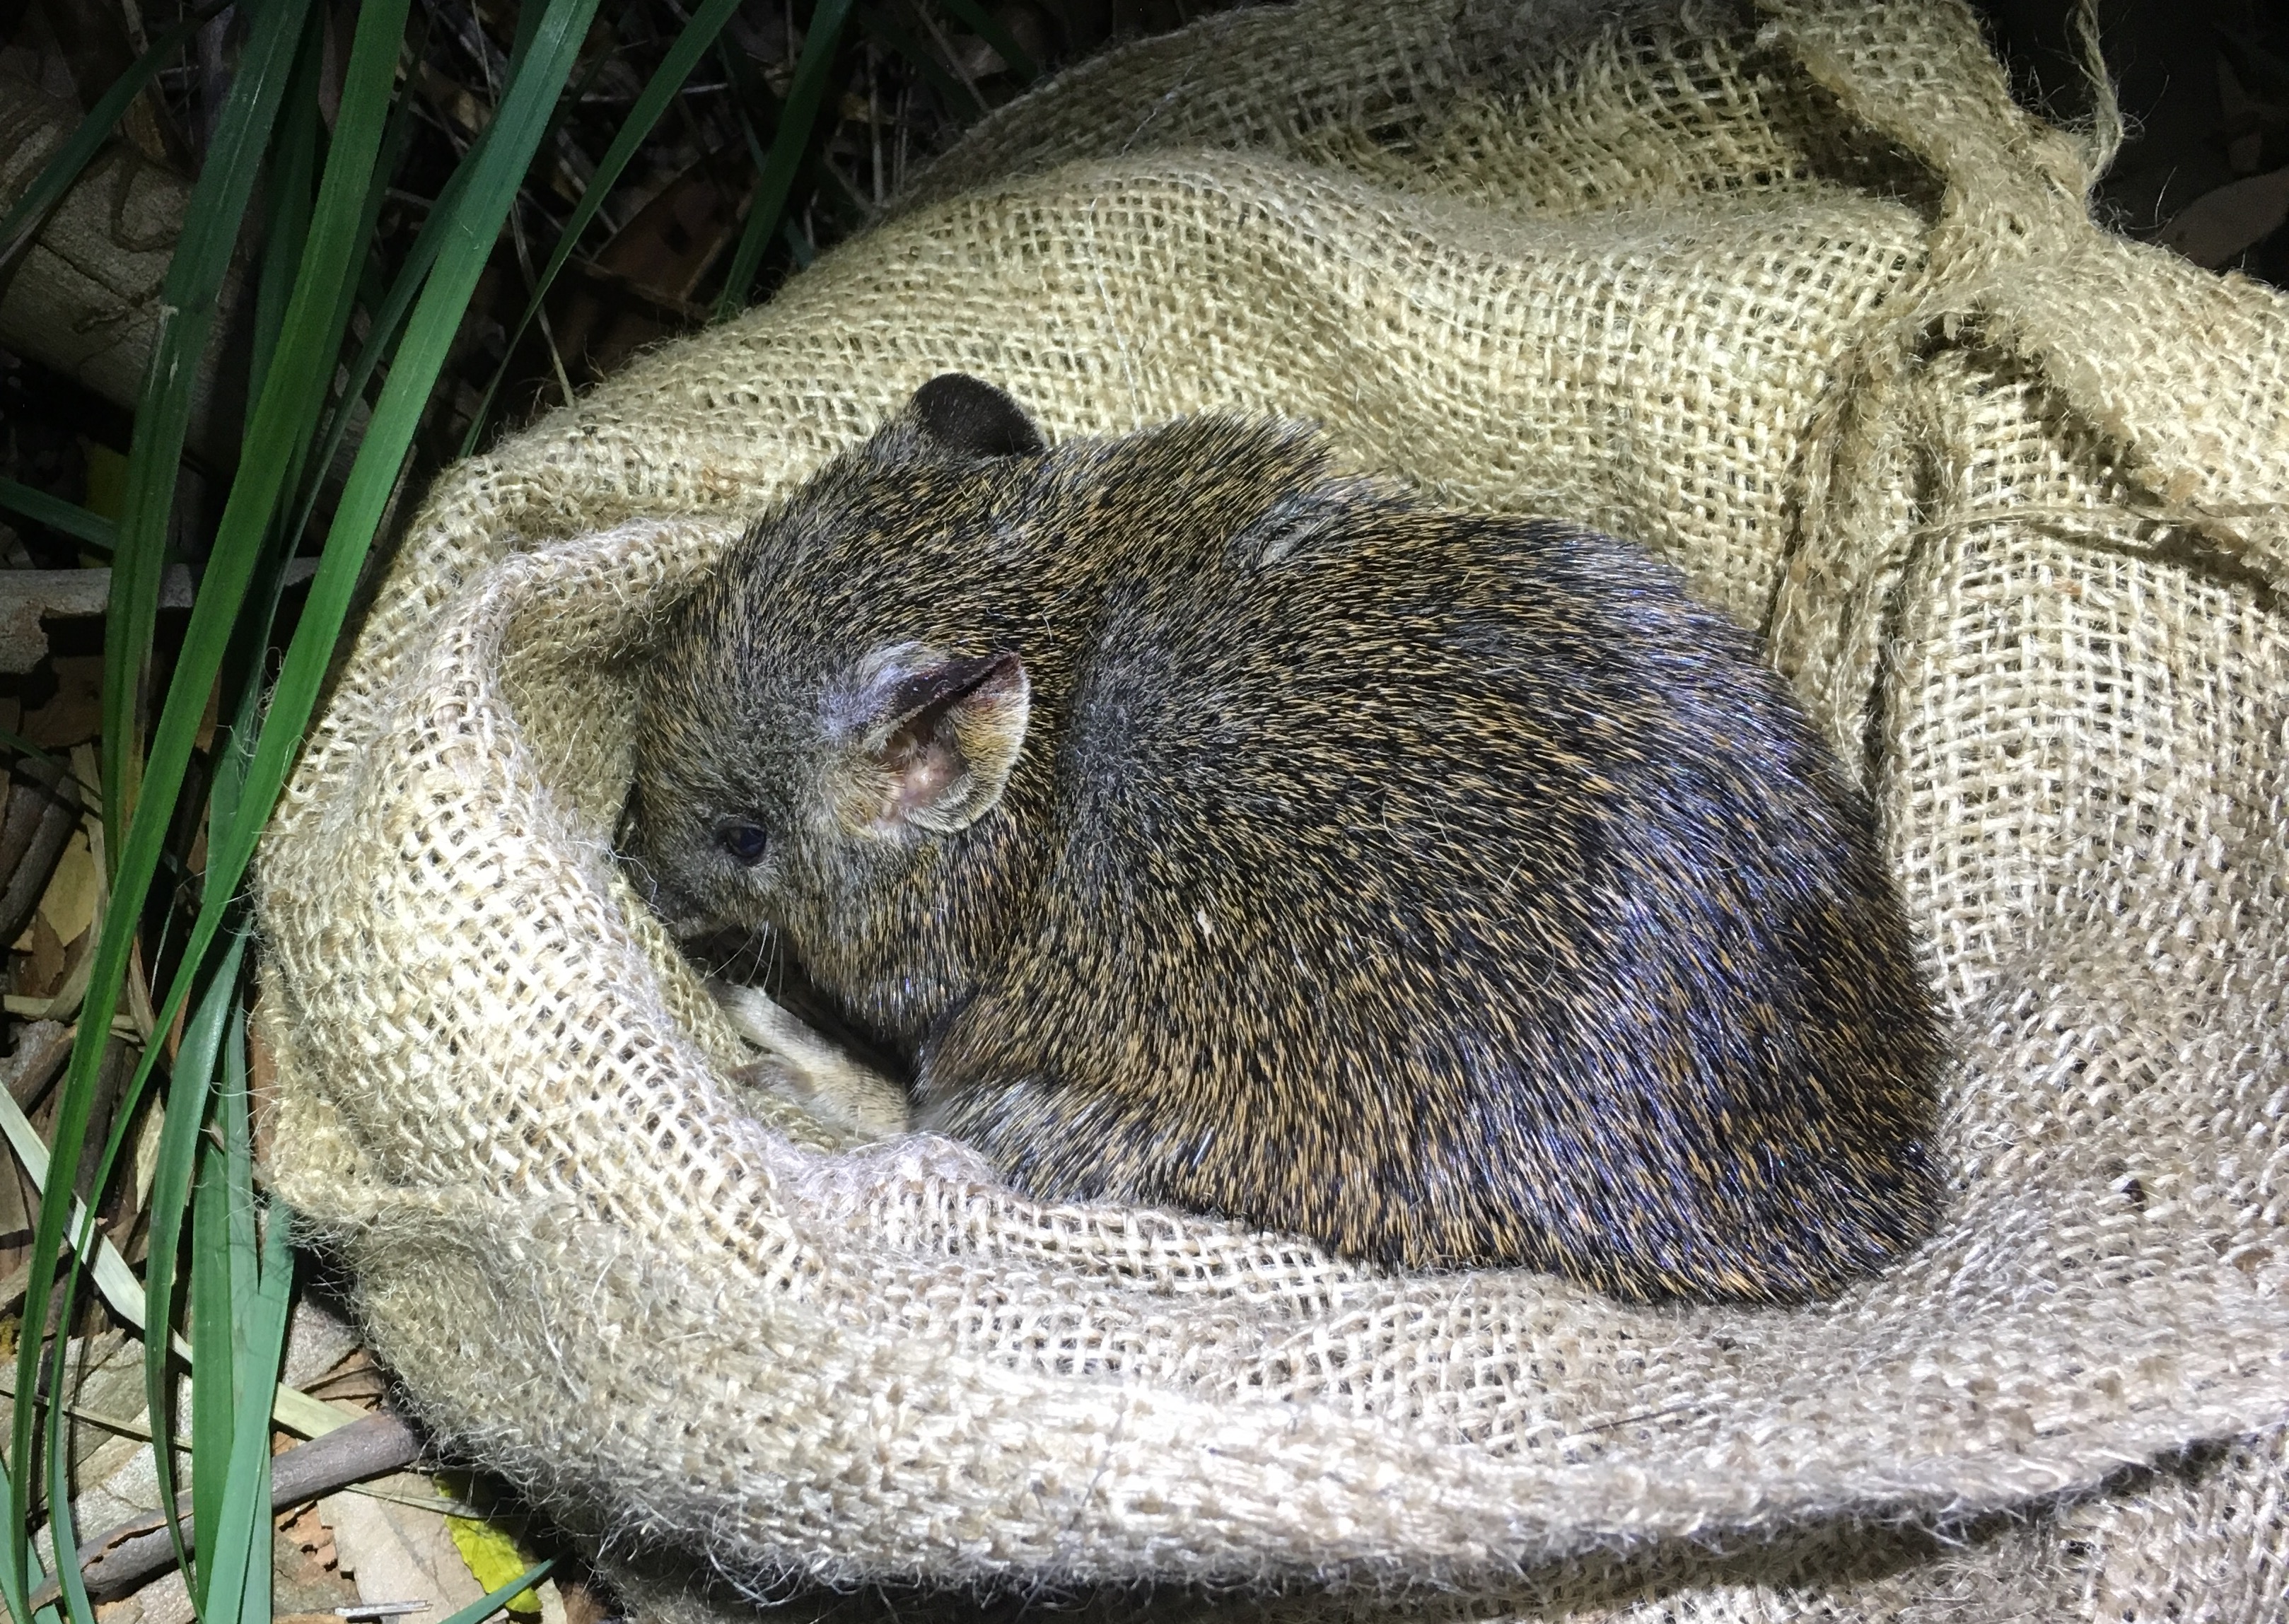 Southern brown bandicoots return to Booderee after almost 100 years